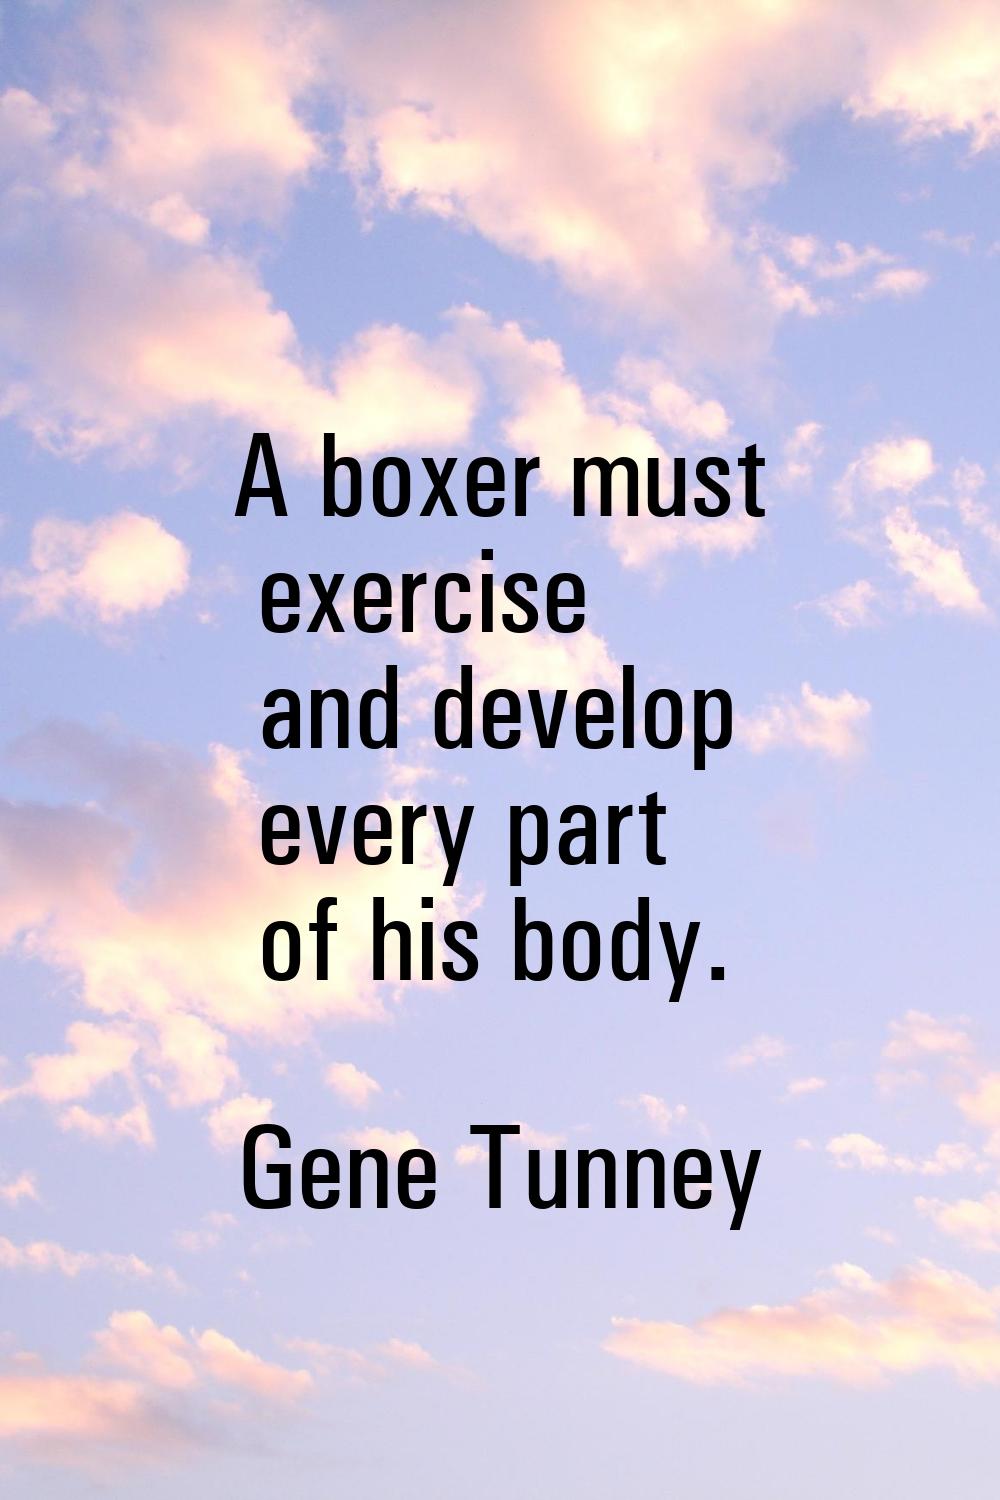 A boxer must exercise and develop every part of his body.